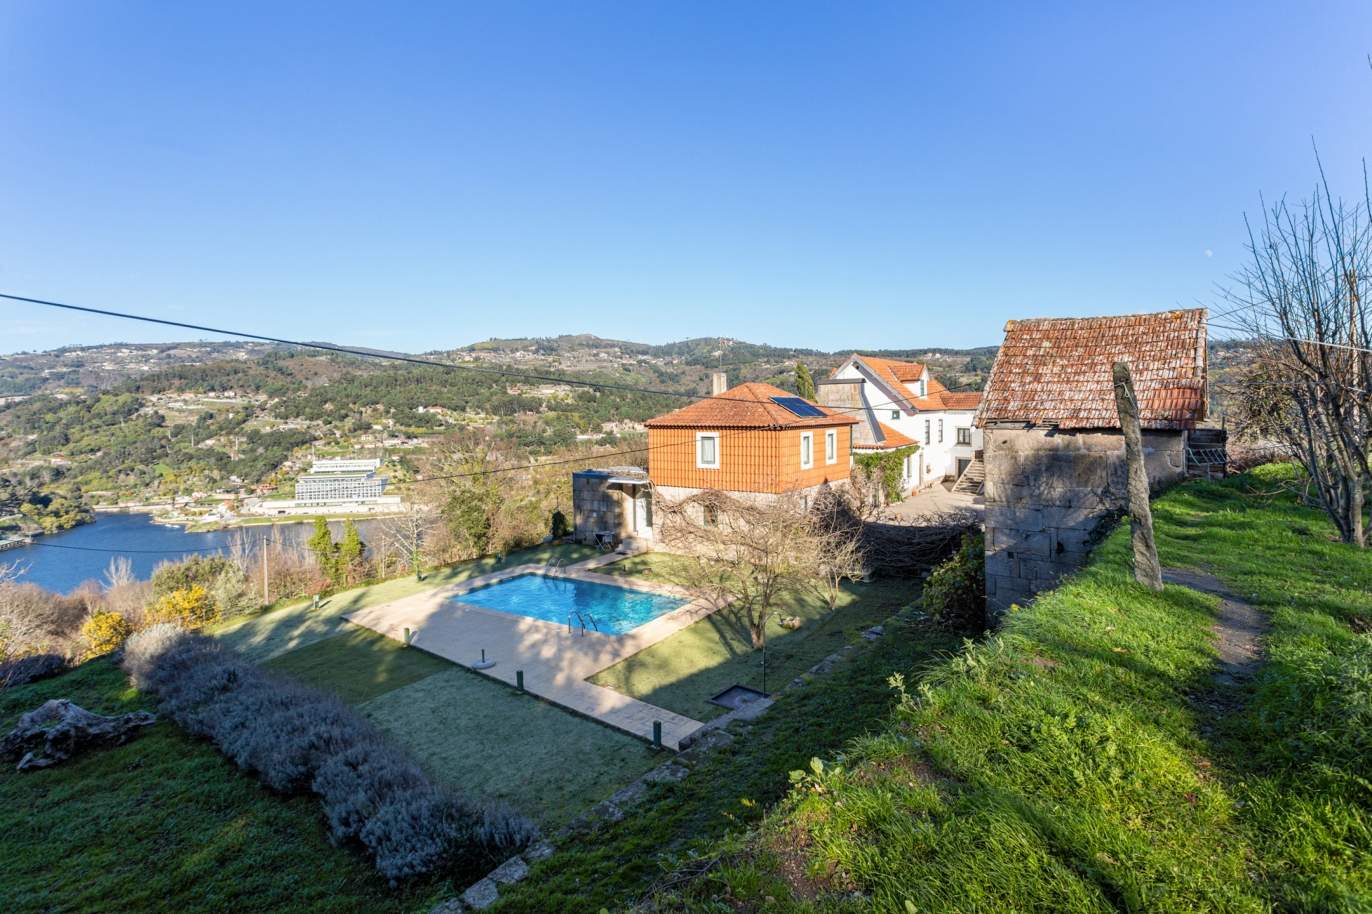 Selling: Property with pool and gardens, in the Douro Region, Cinfães, North Portugal_189872